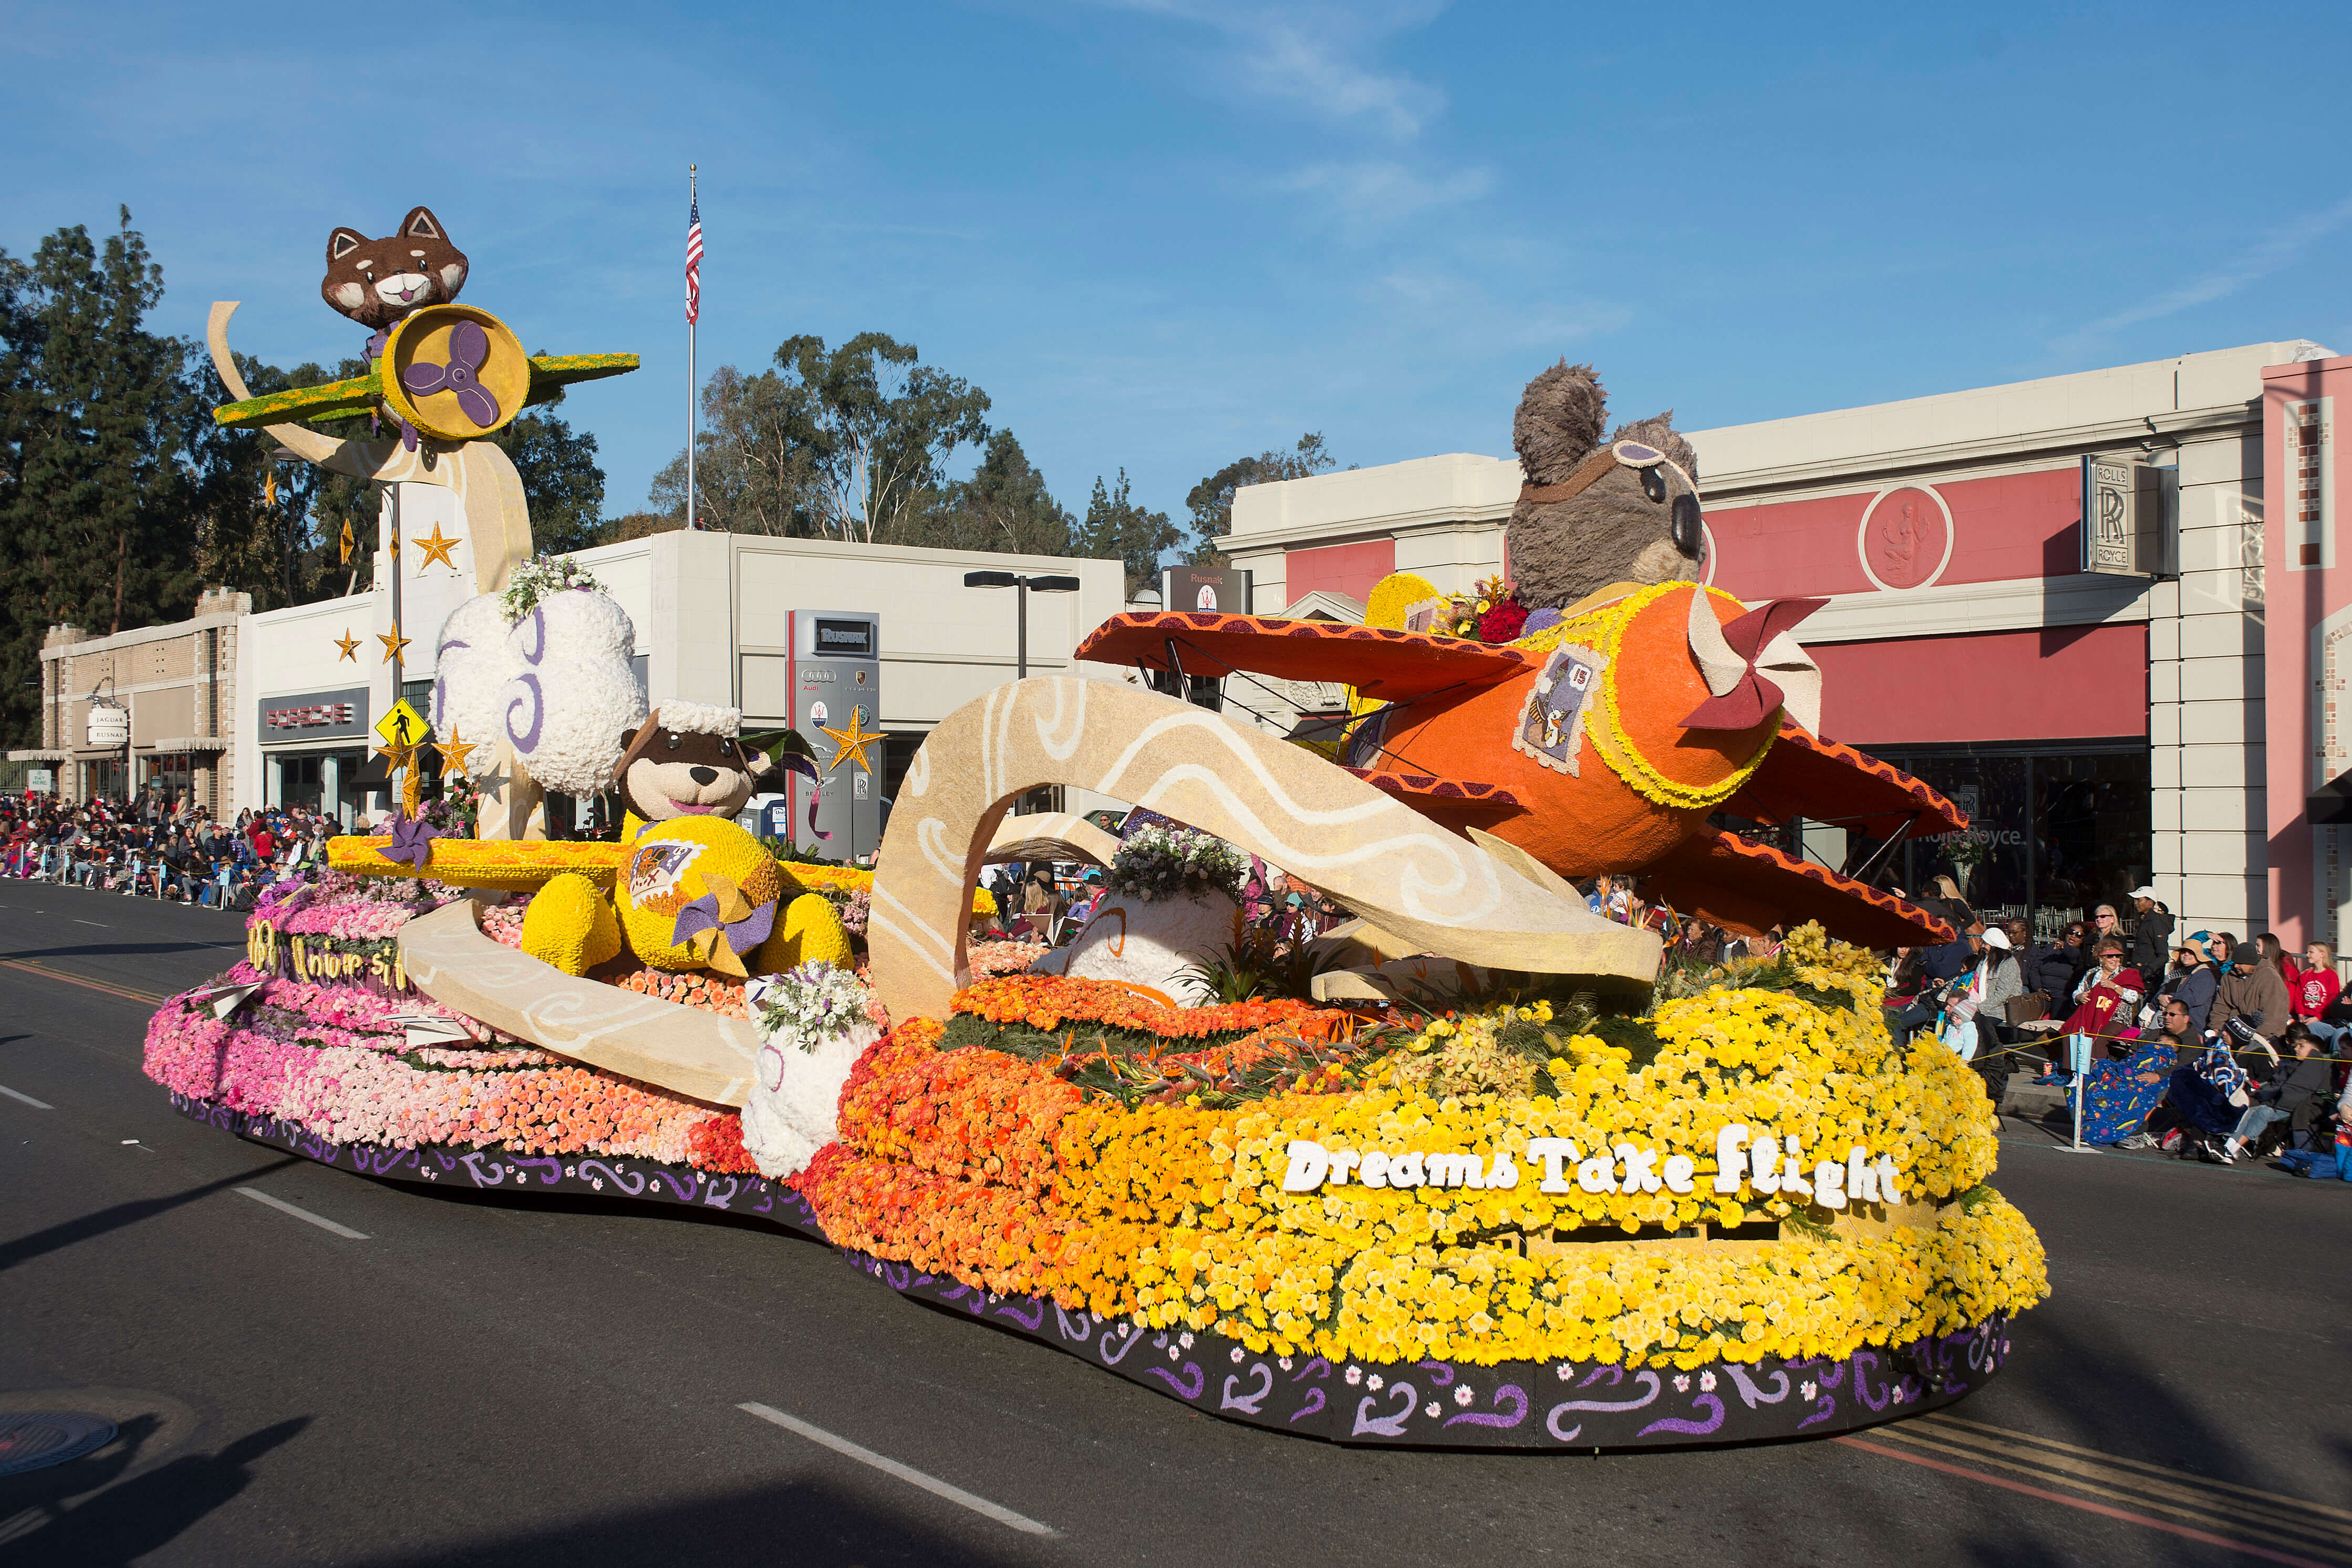 Cal Poly Rose Float's 2019 Float titled Dreams Take Fligh featuring a koala and otter covered in flowers flying airplanes